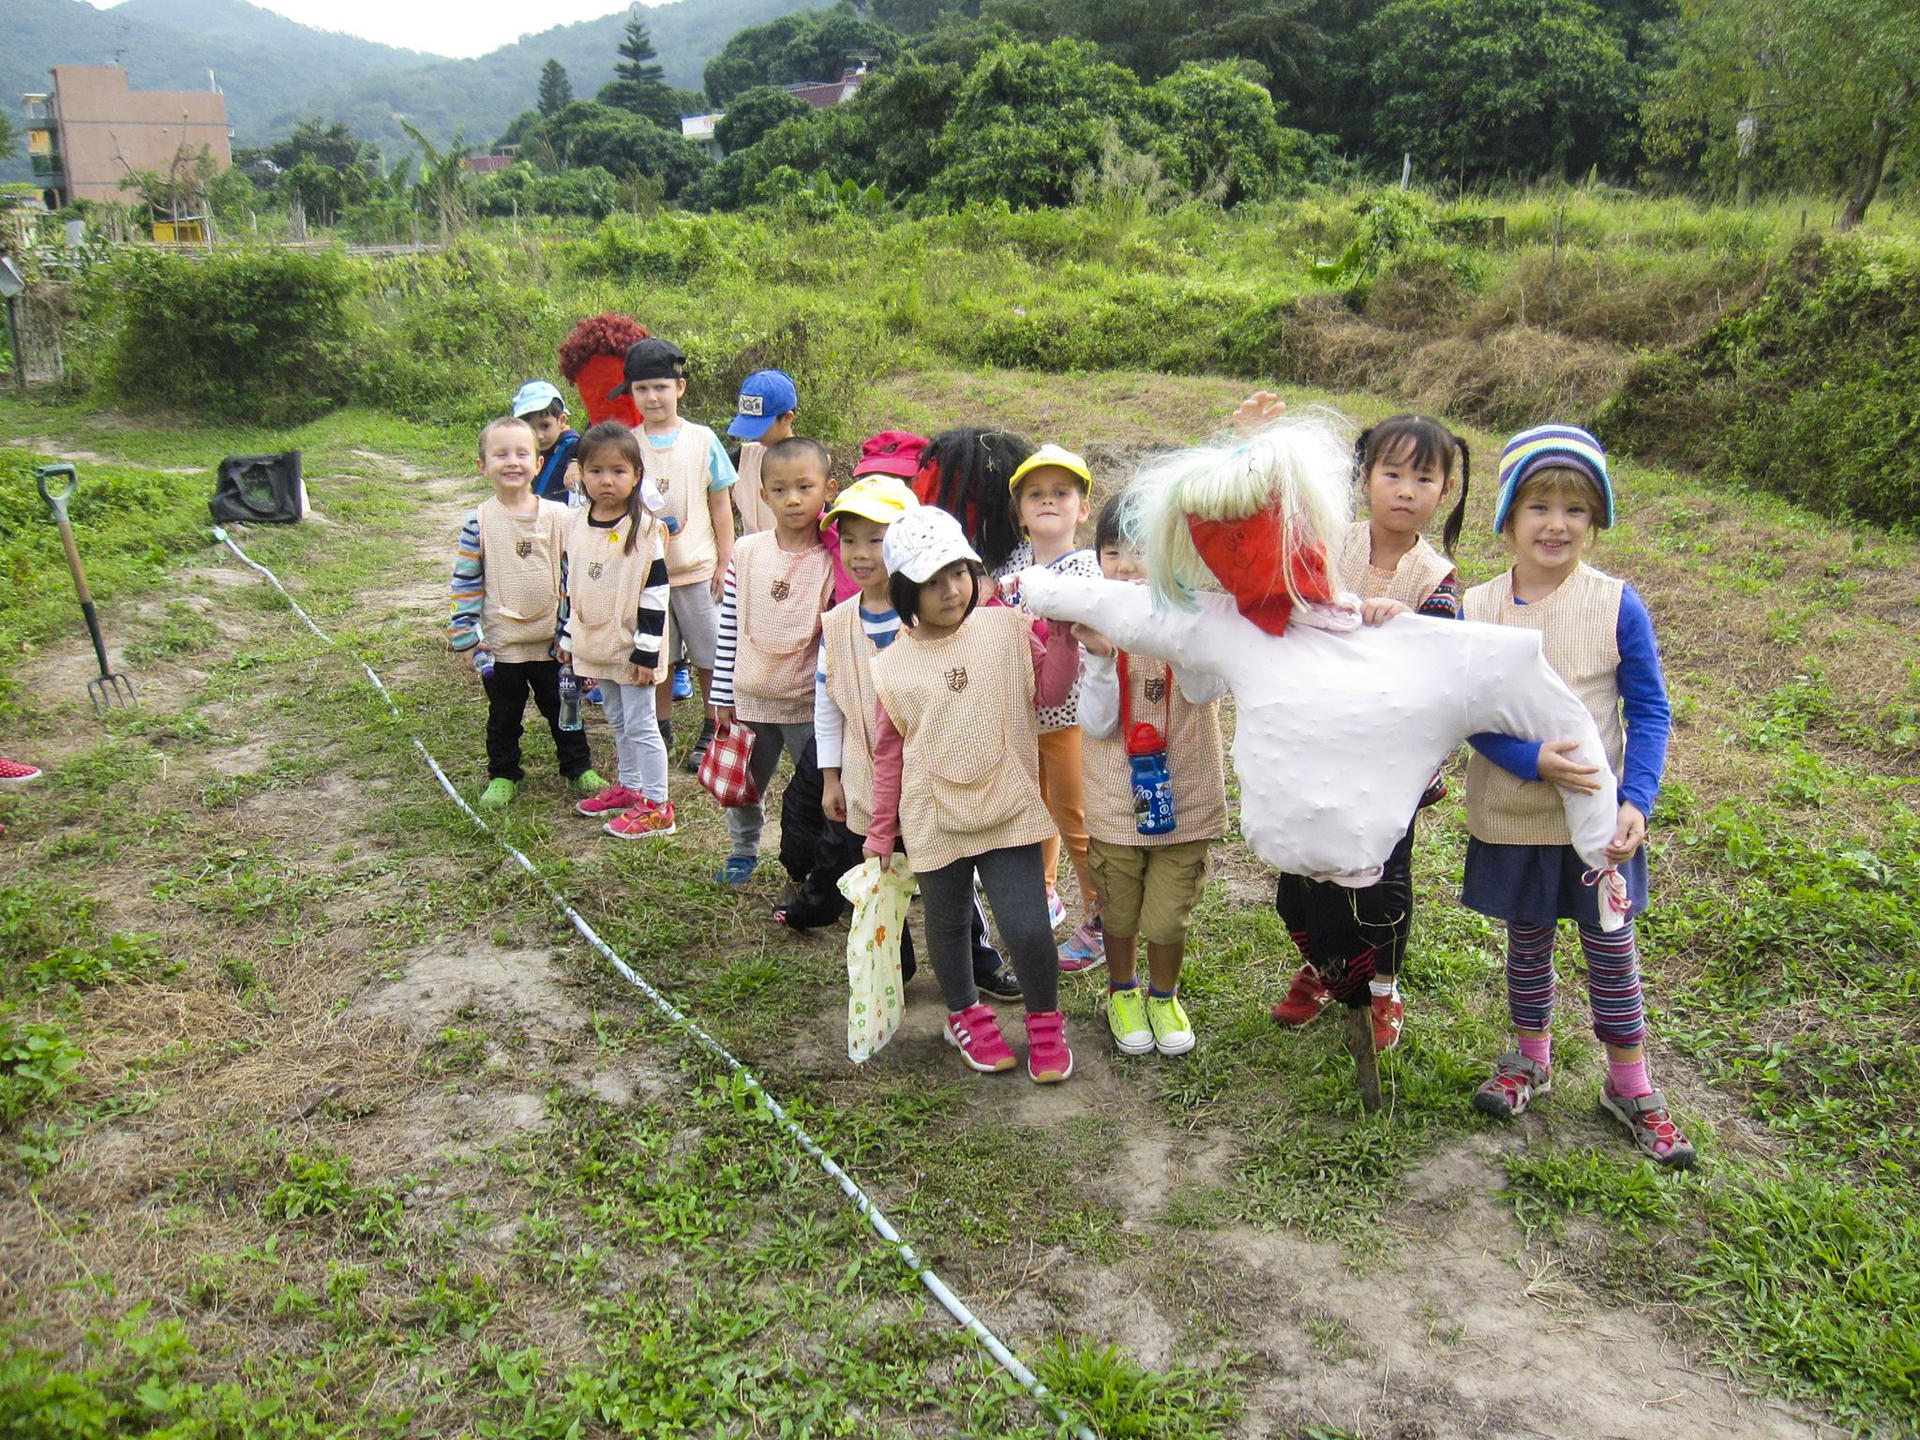 Making a scarecrow to protect seed beds is part of the hands-on fun for children at Dragontail Farm near Mui Wo.